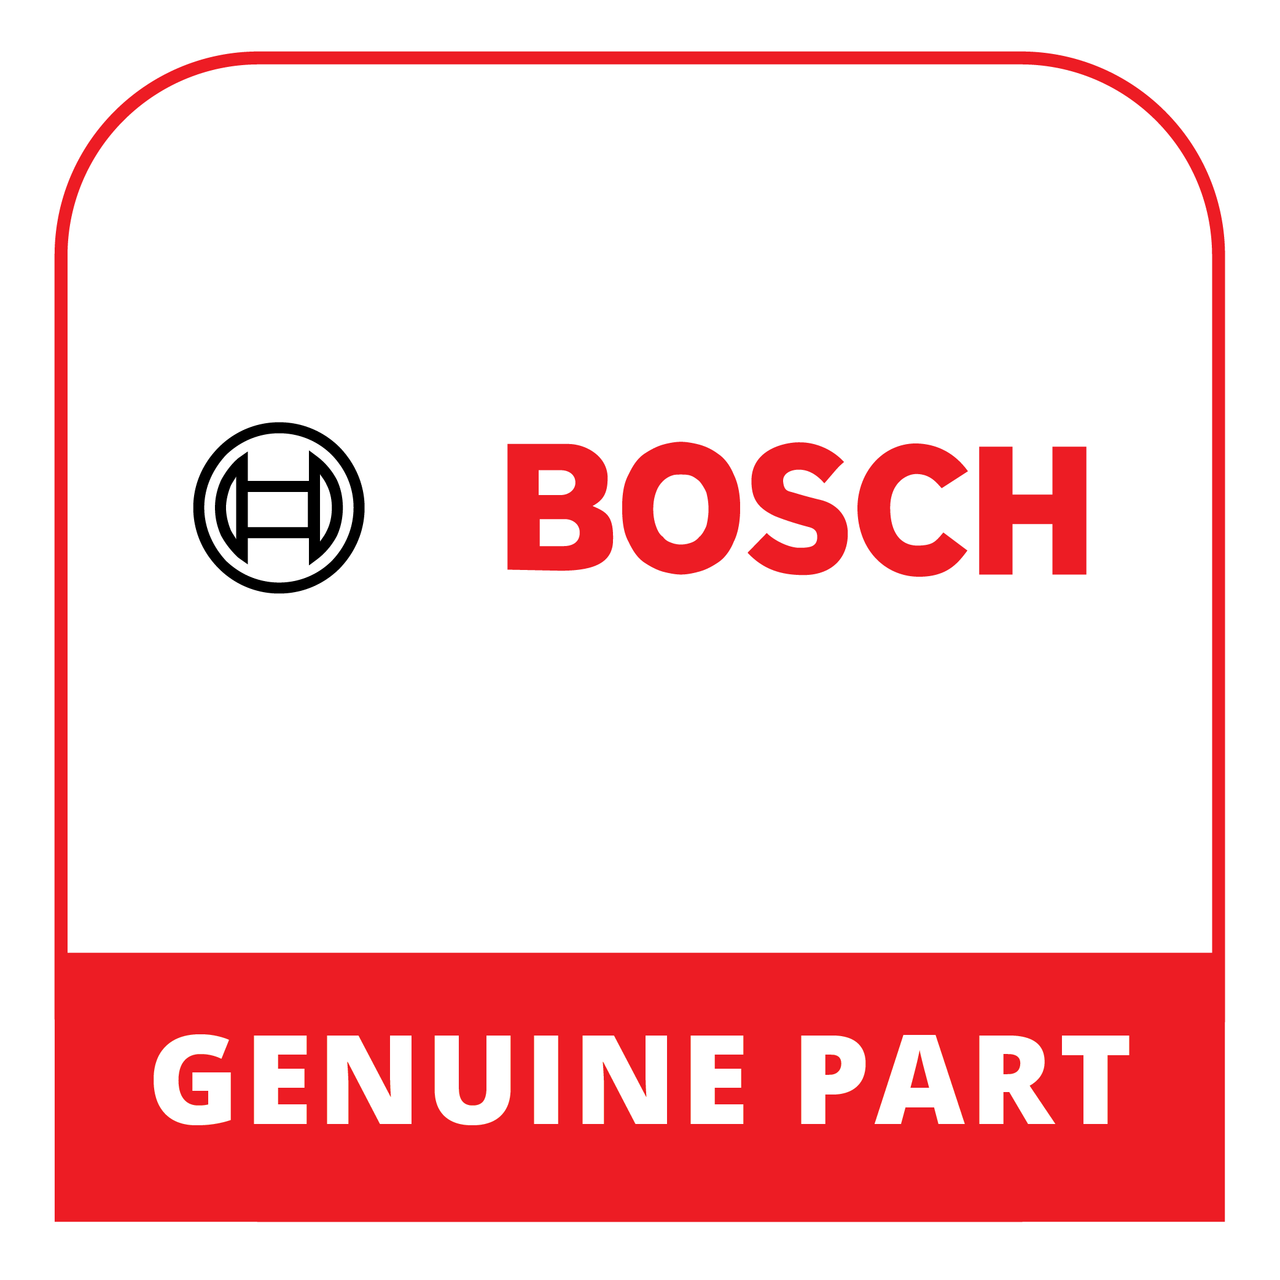 Bosch (Thermador) 20003079 - Cover Sheet - Genuine Bosch (Thermador) Part